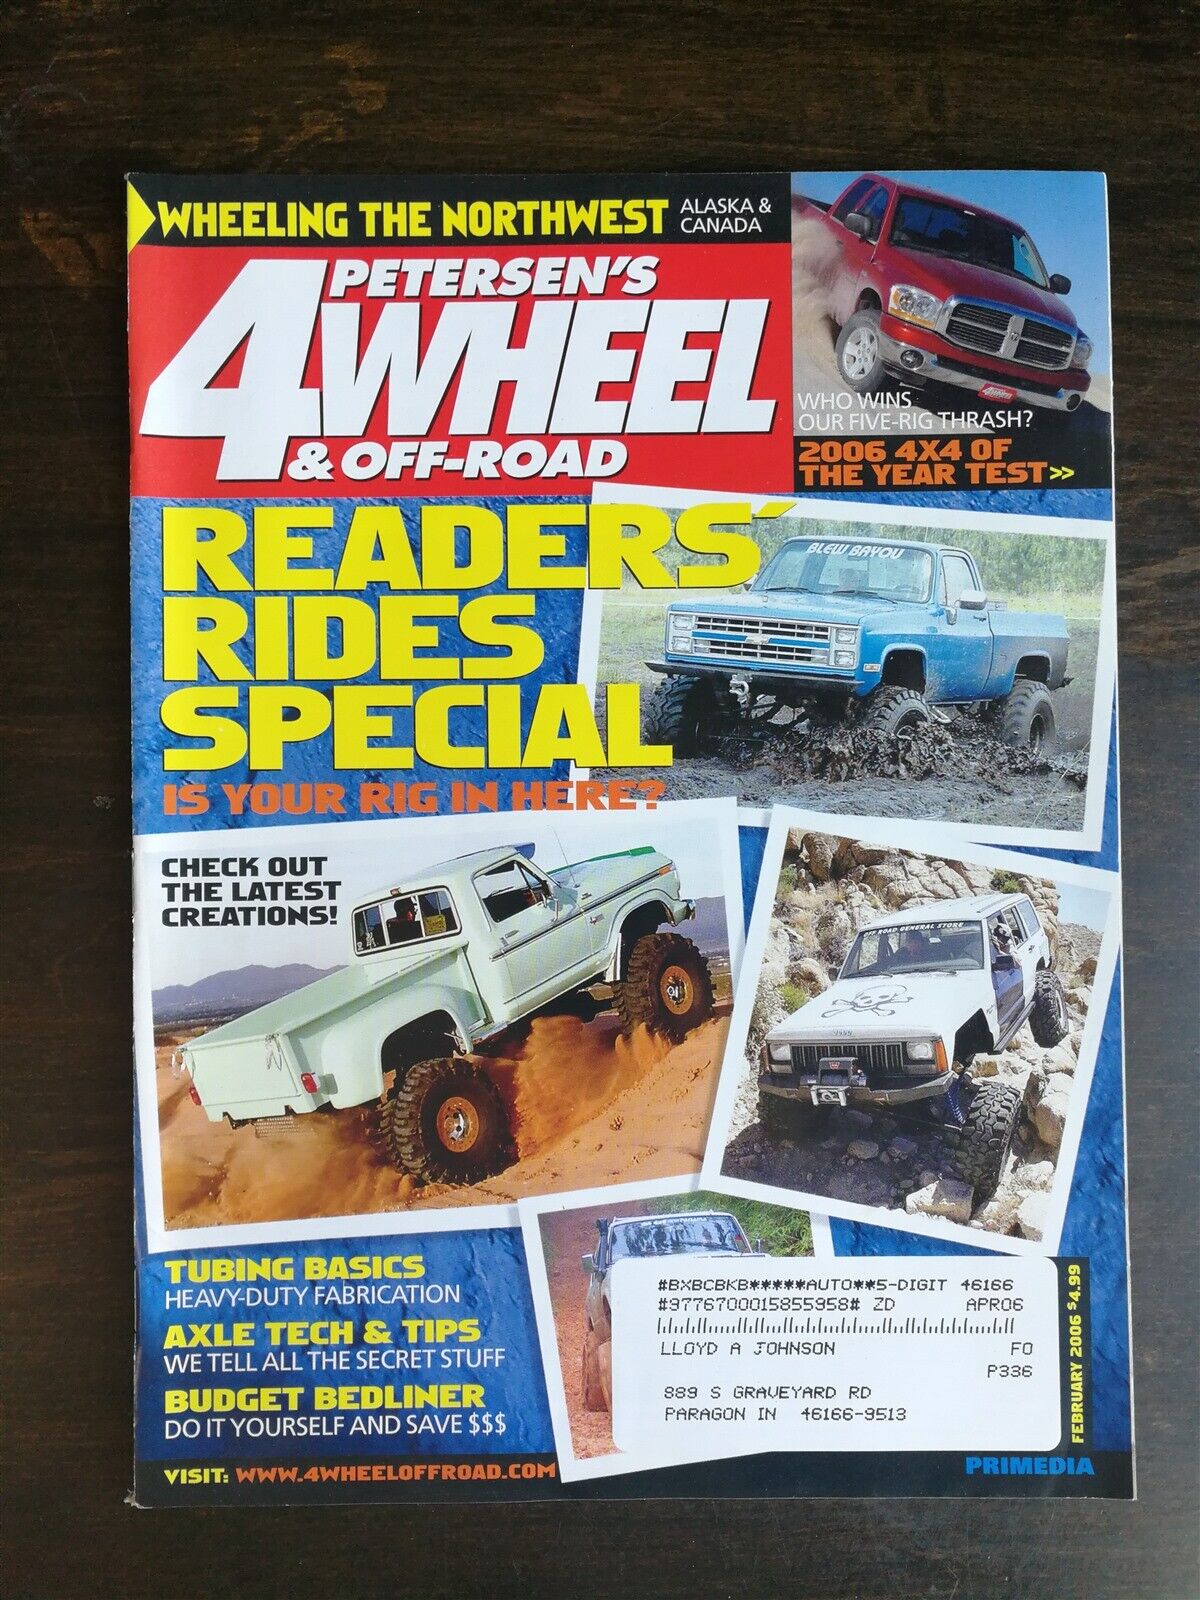 4 Wheel & Off Road Magazine February 2006 - Readers Rides Special - 4x4 of Year